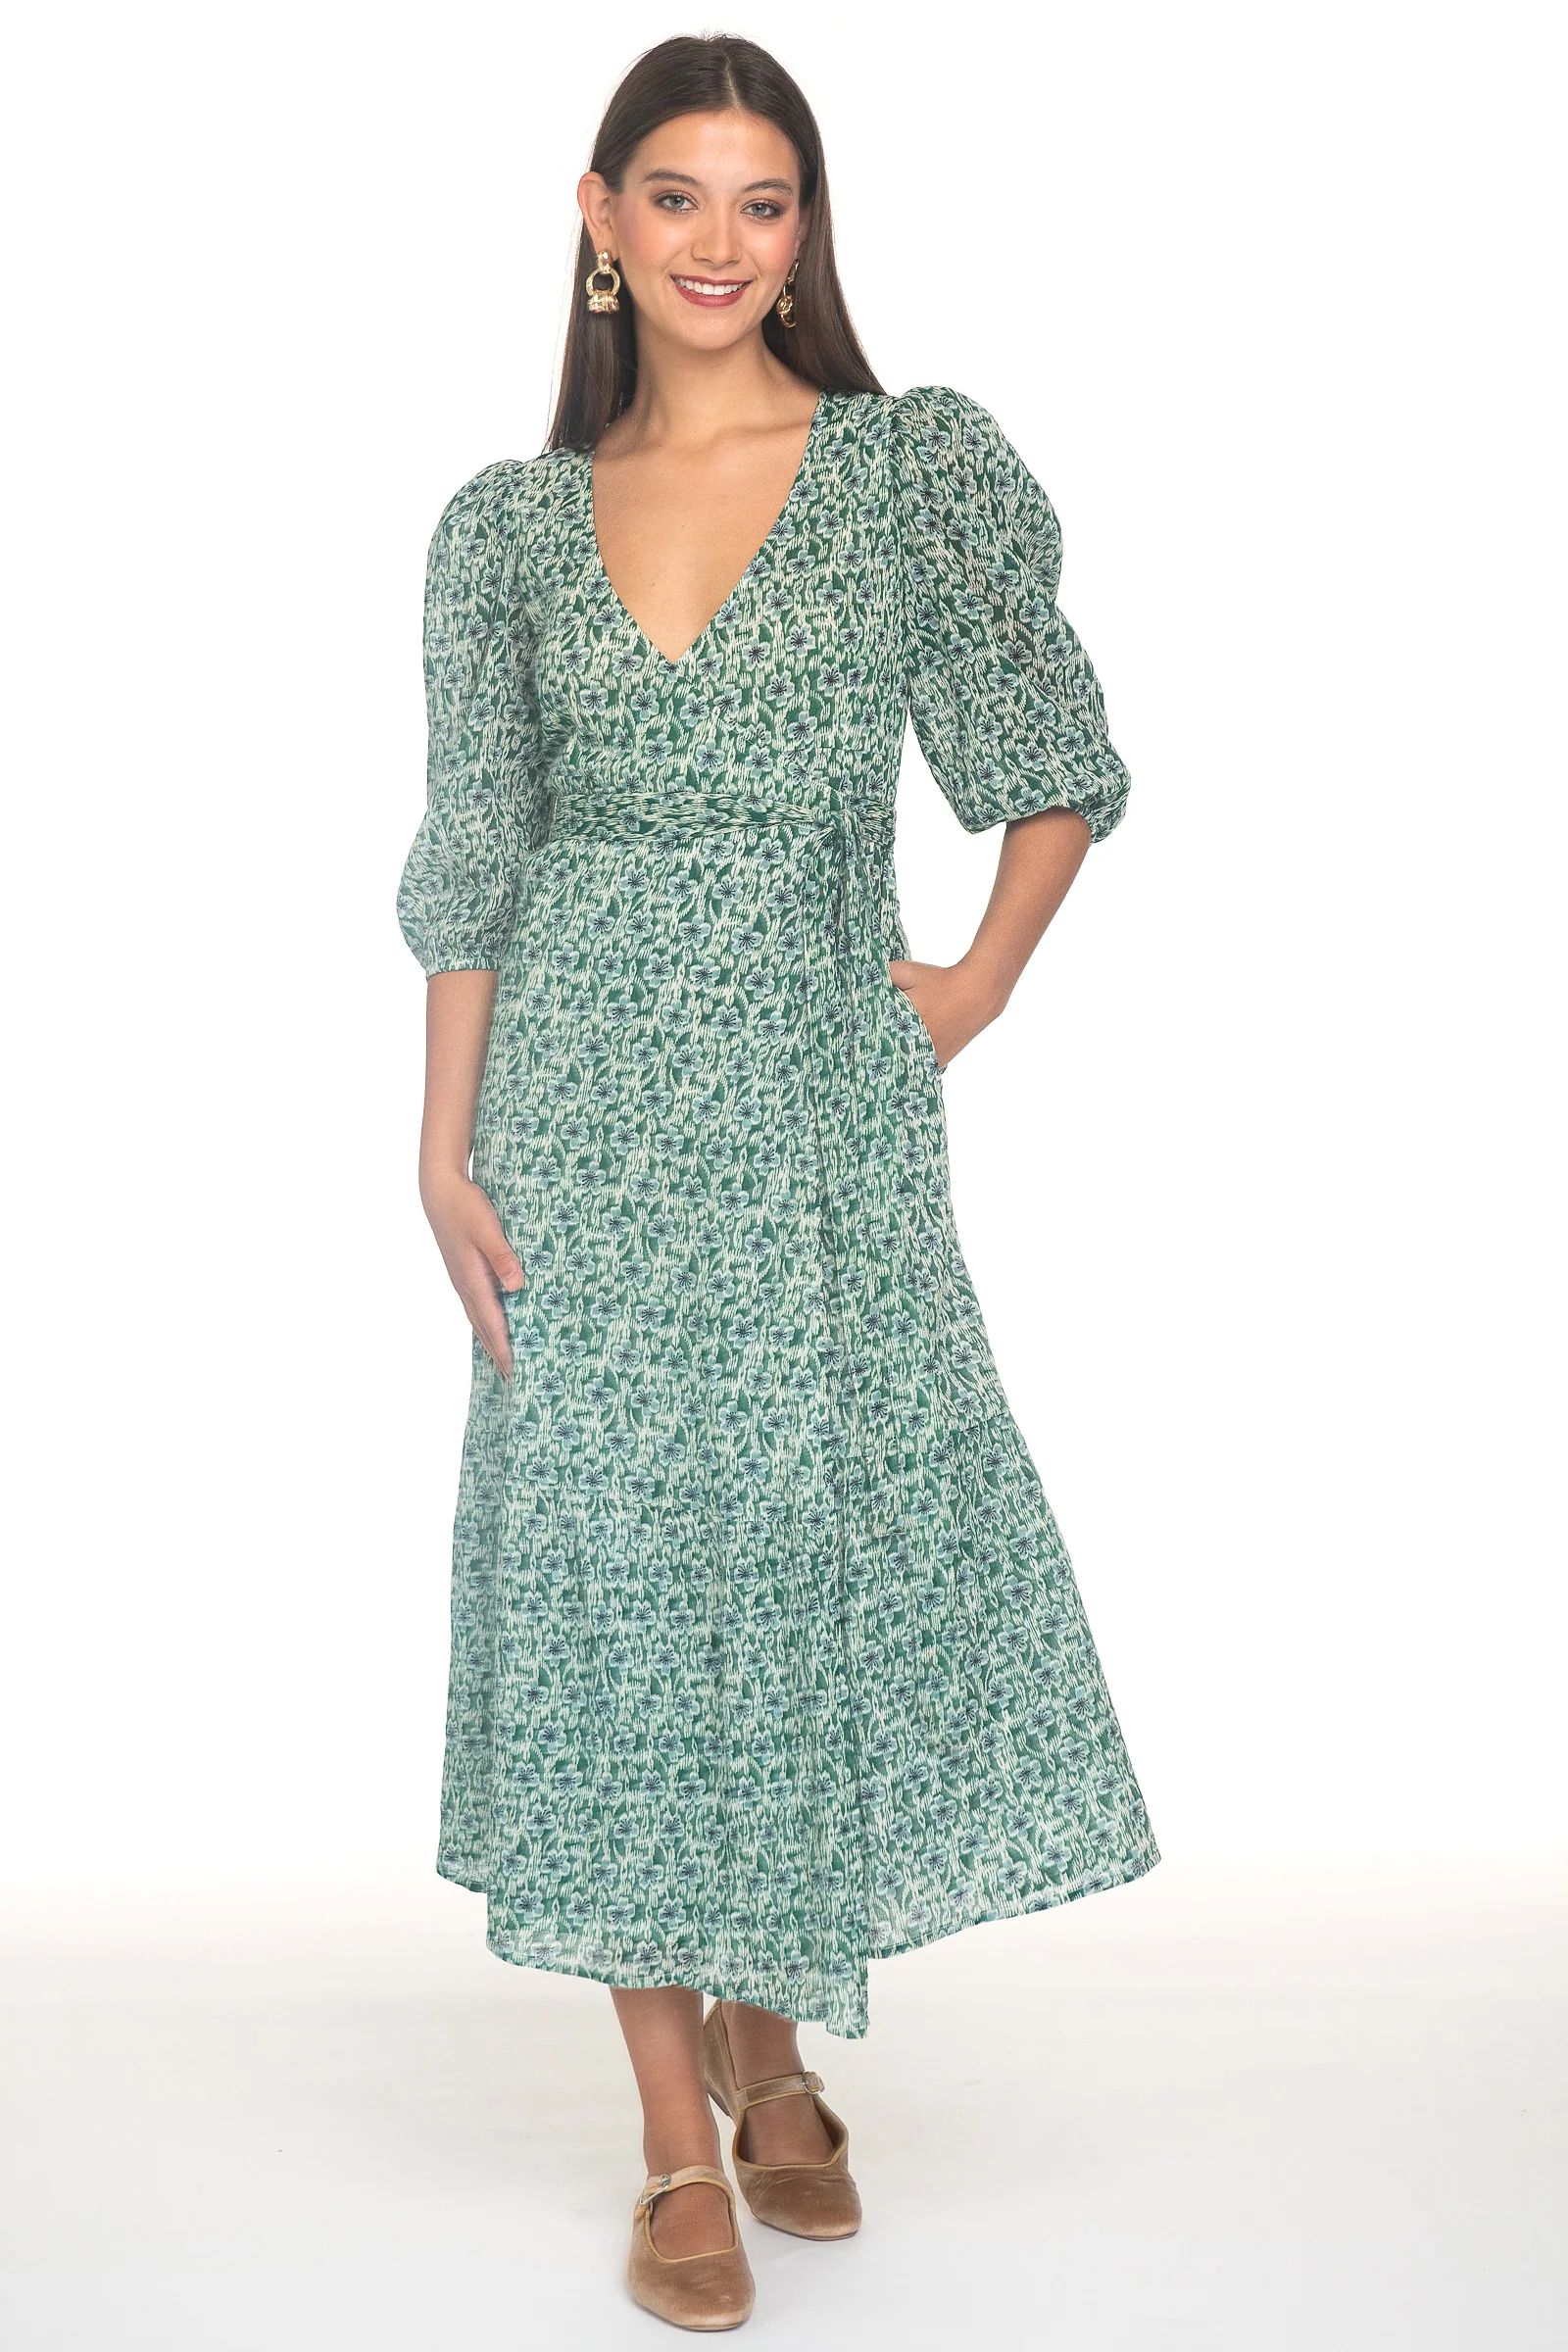 Claire Dress in Scatter Pine | Olivia James The Label